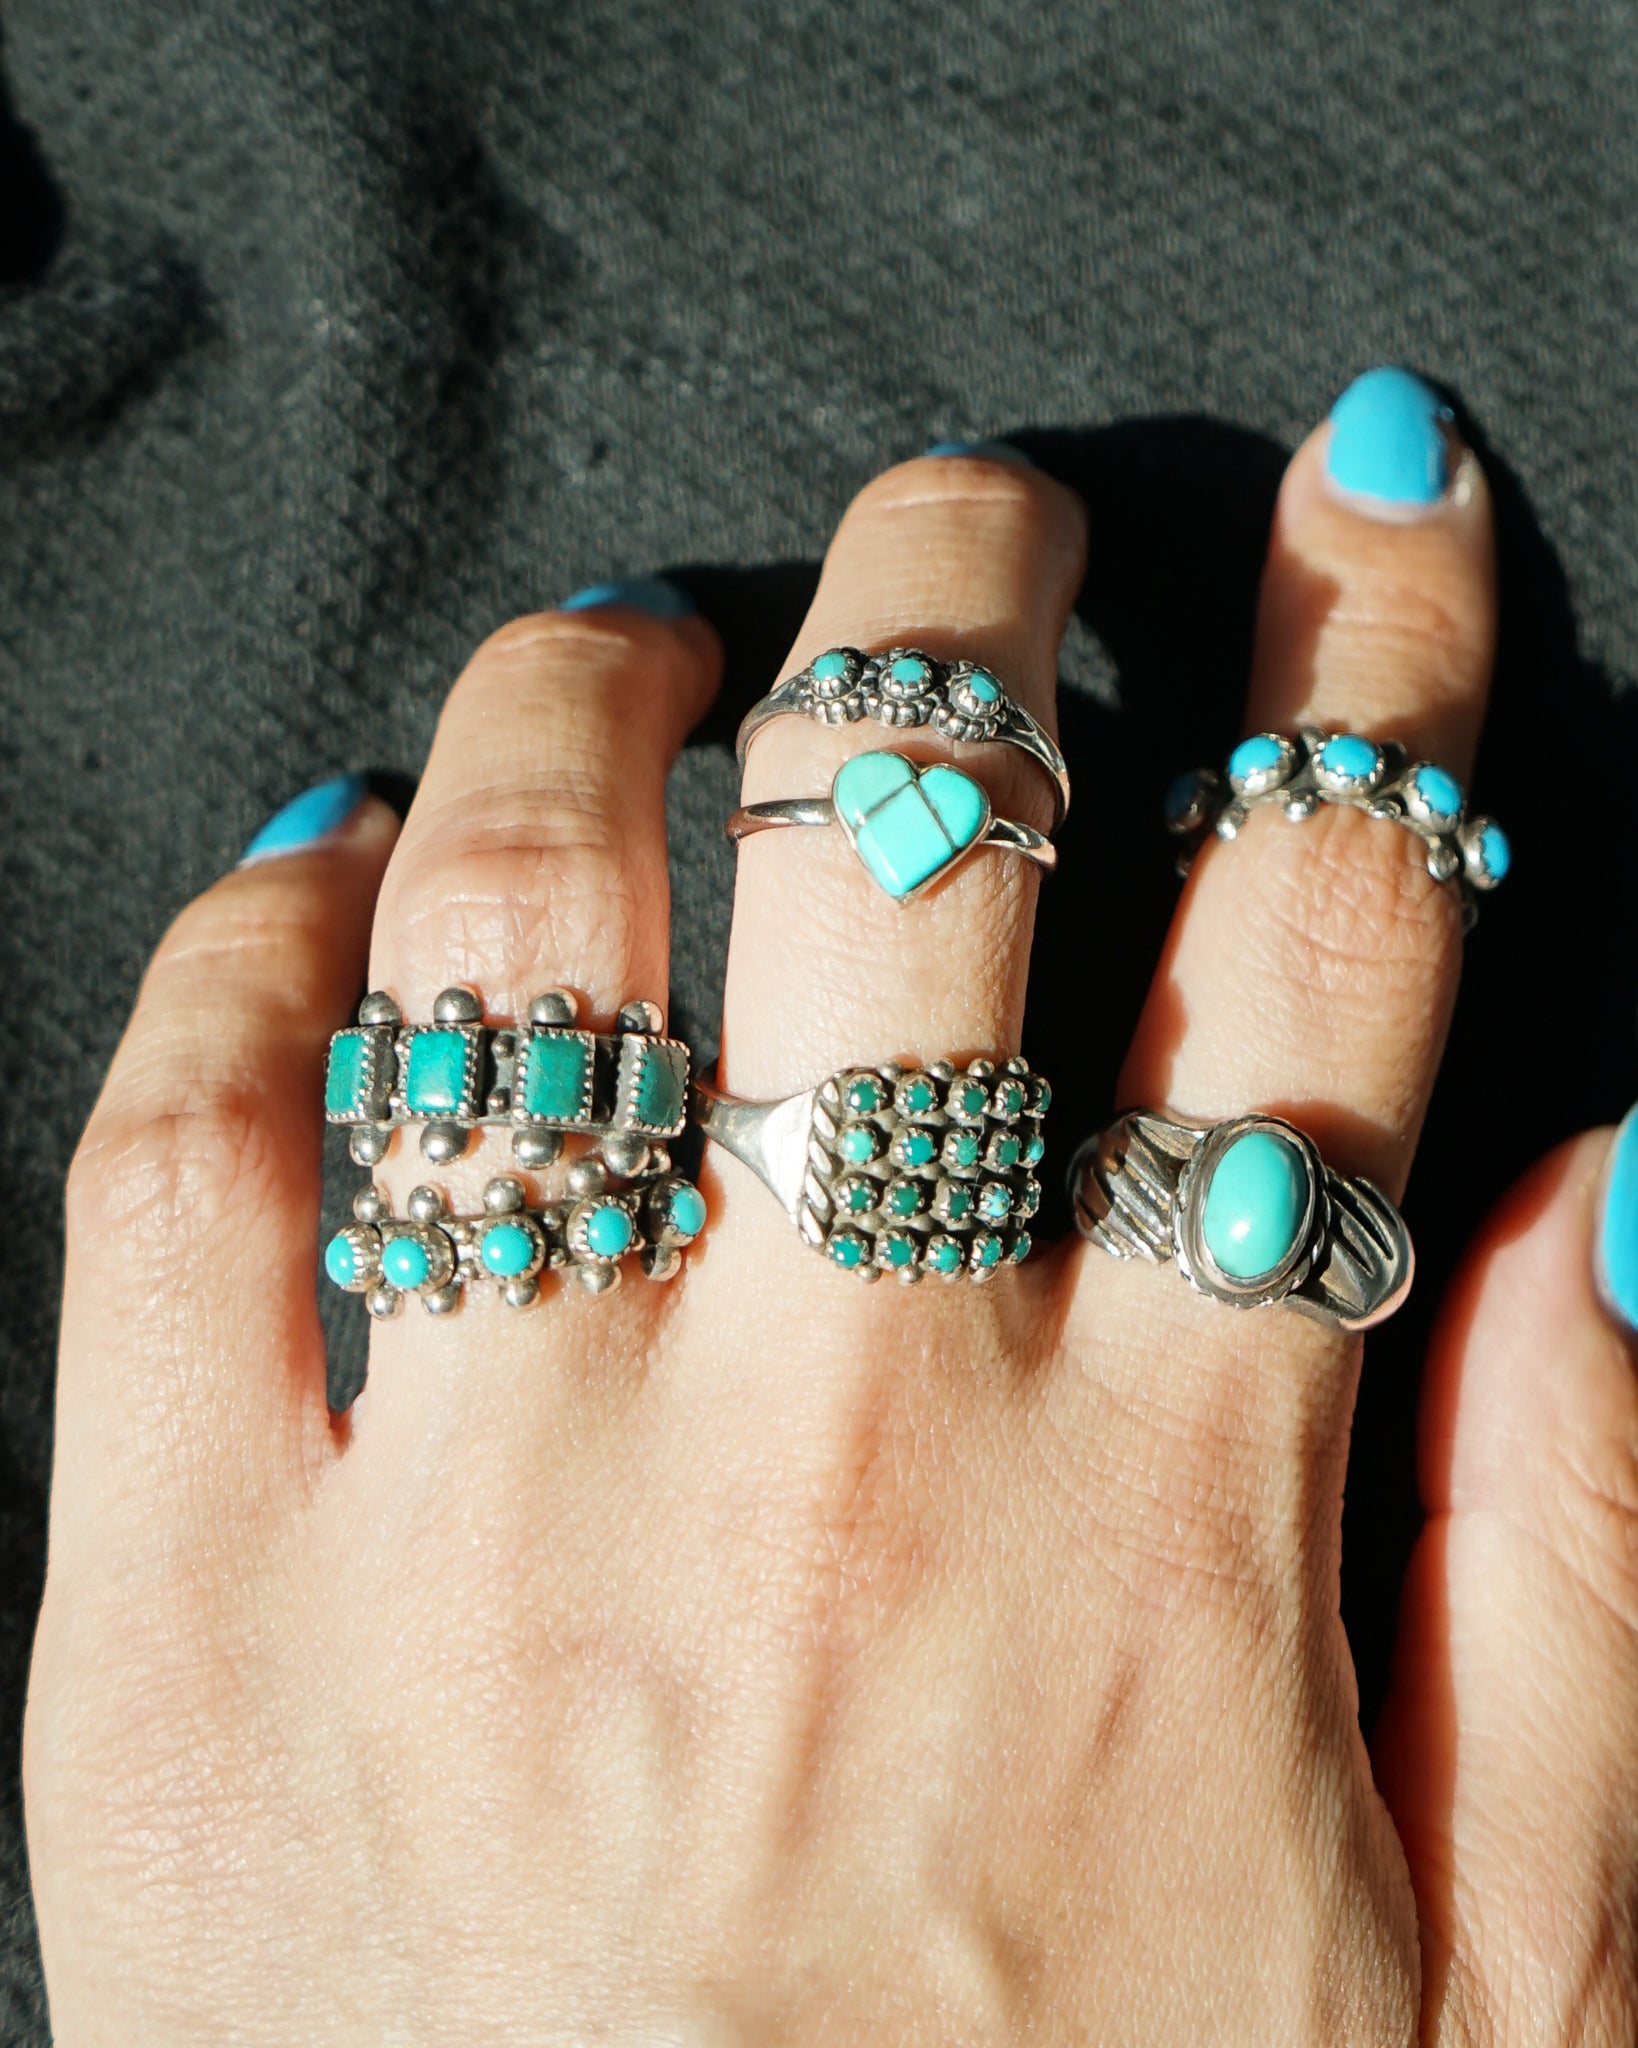 Silver x Turquoise Ring / size: 7